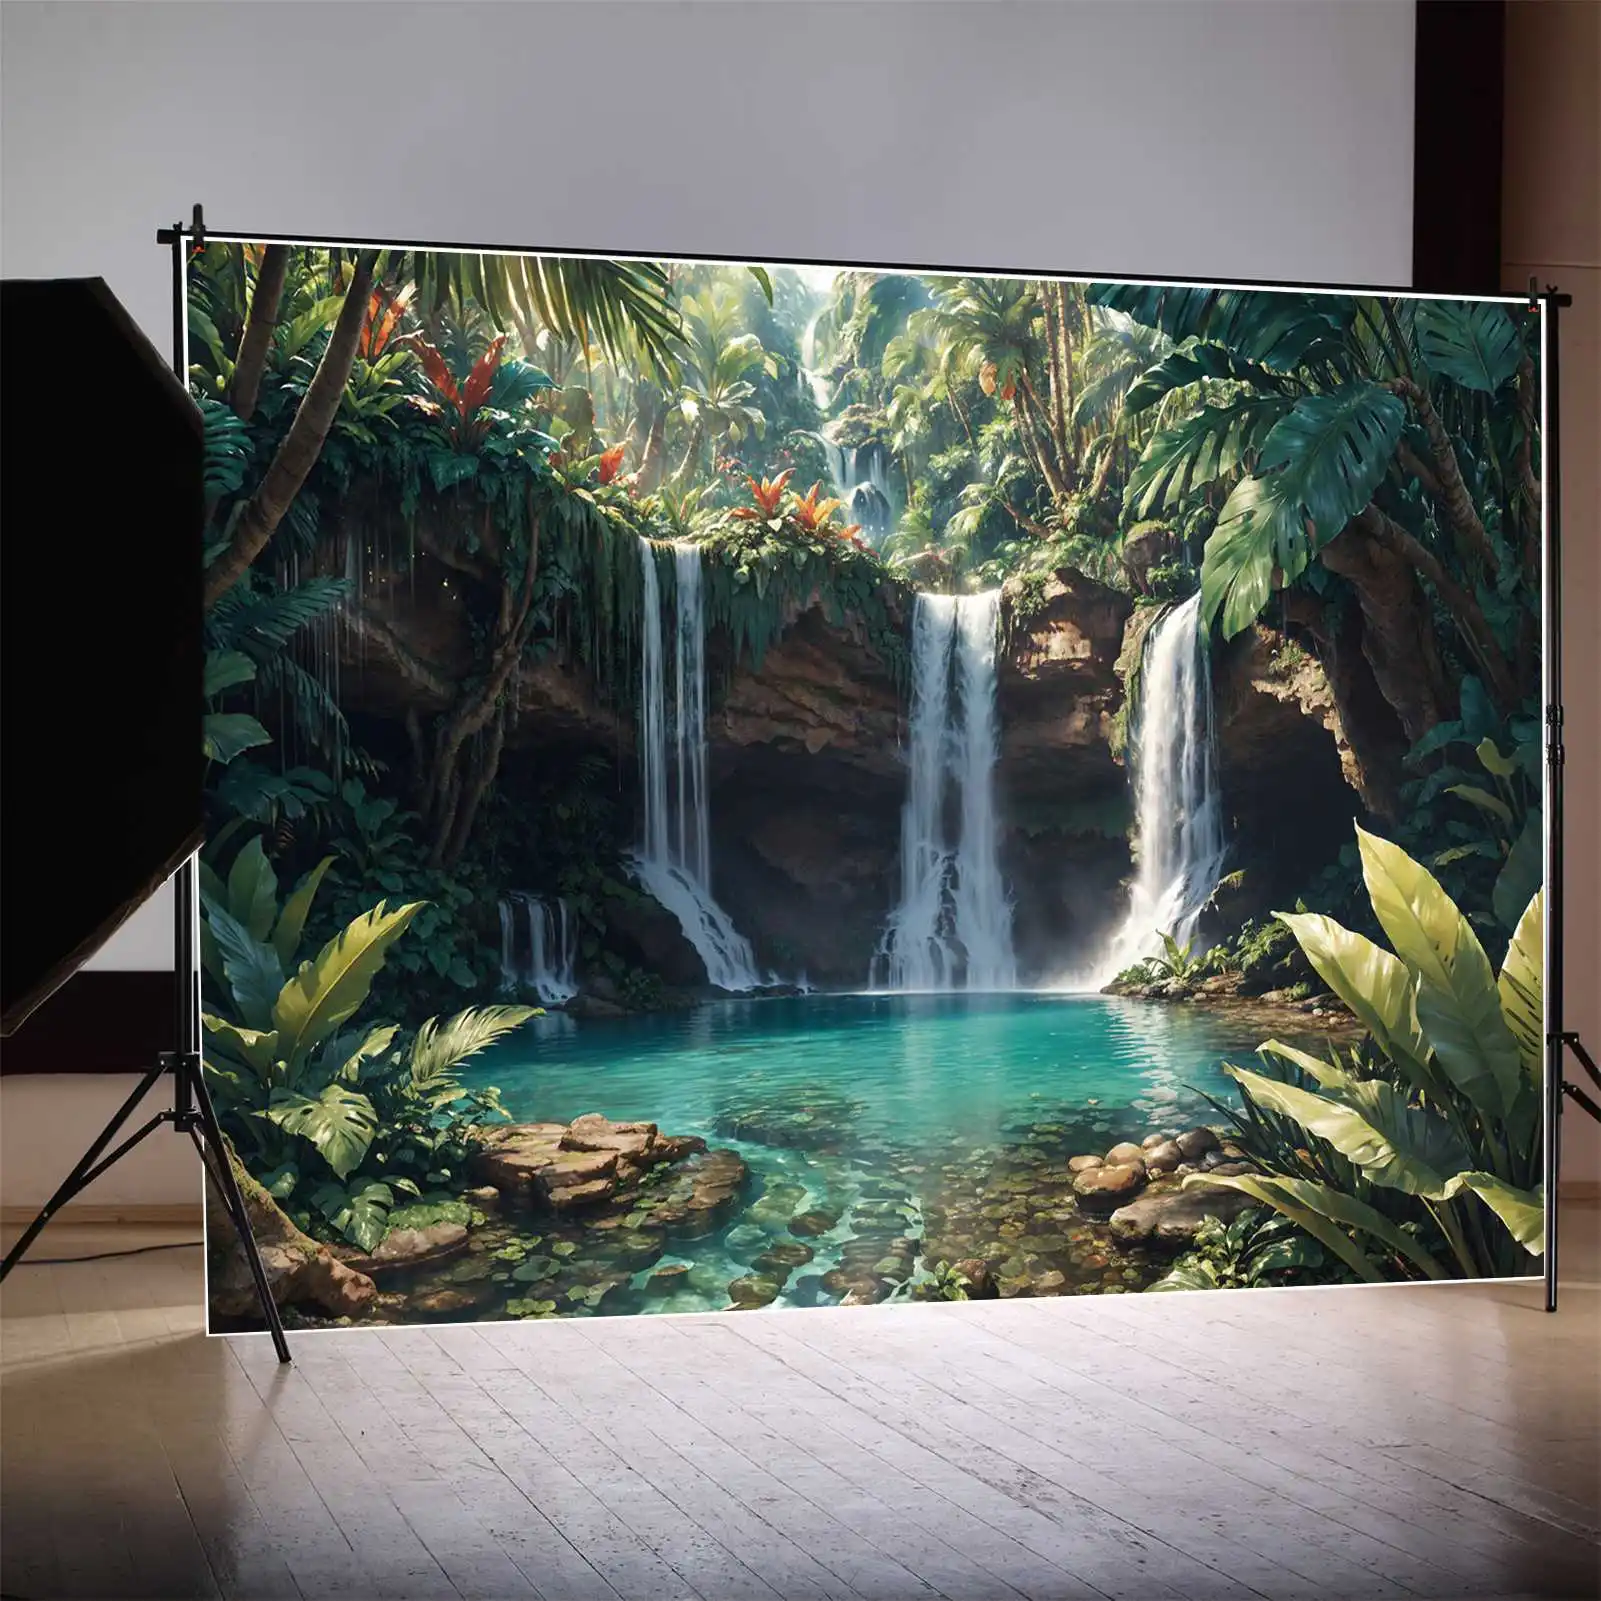 

Jungle Mountains Waterfall Photography Backdrops Lakes Rocks Green Palm Tree Customized Baby Photobooth Backgrounds Studio Props